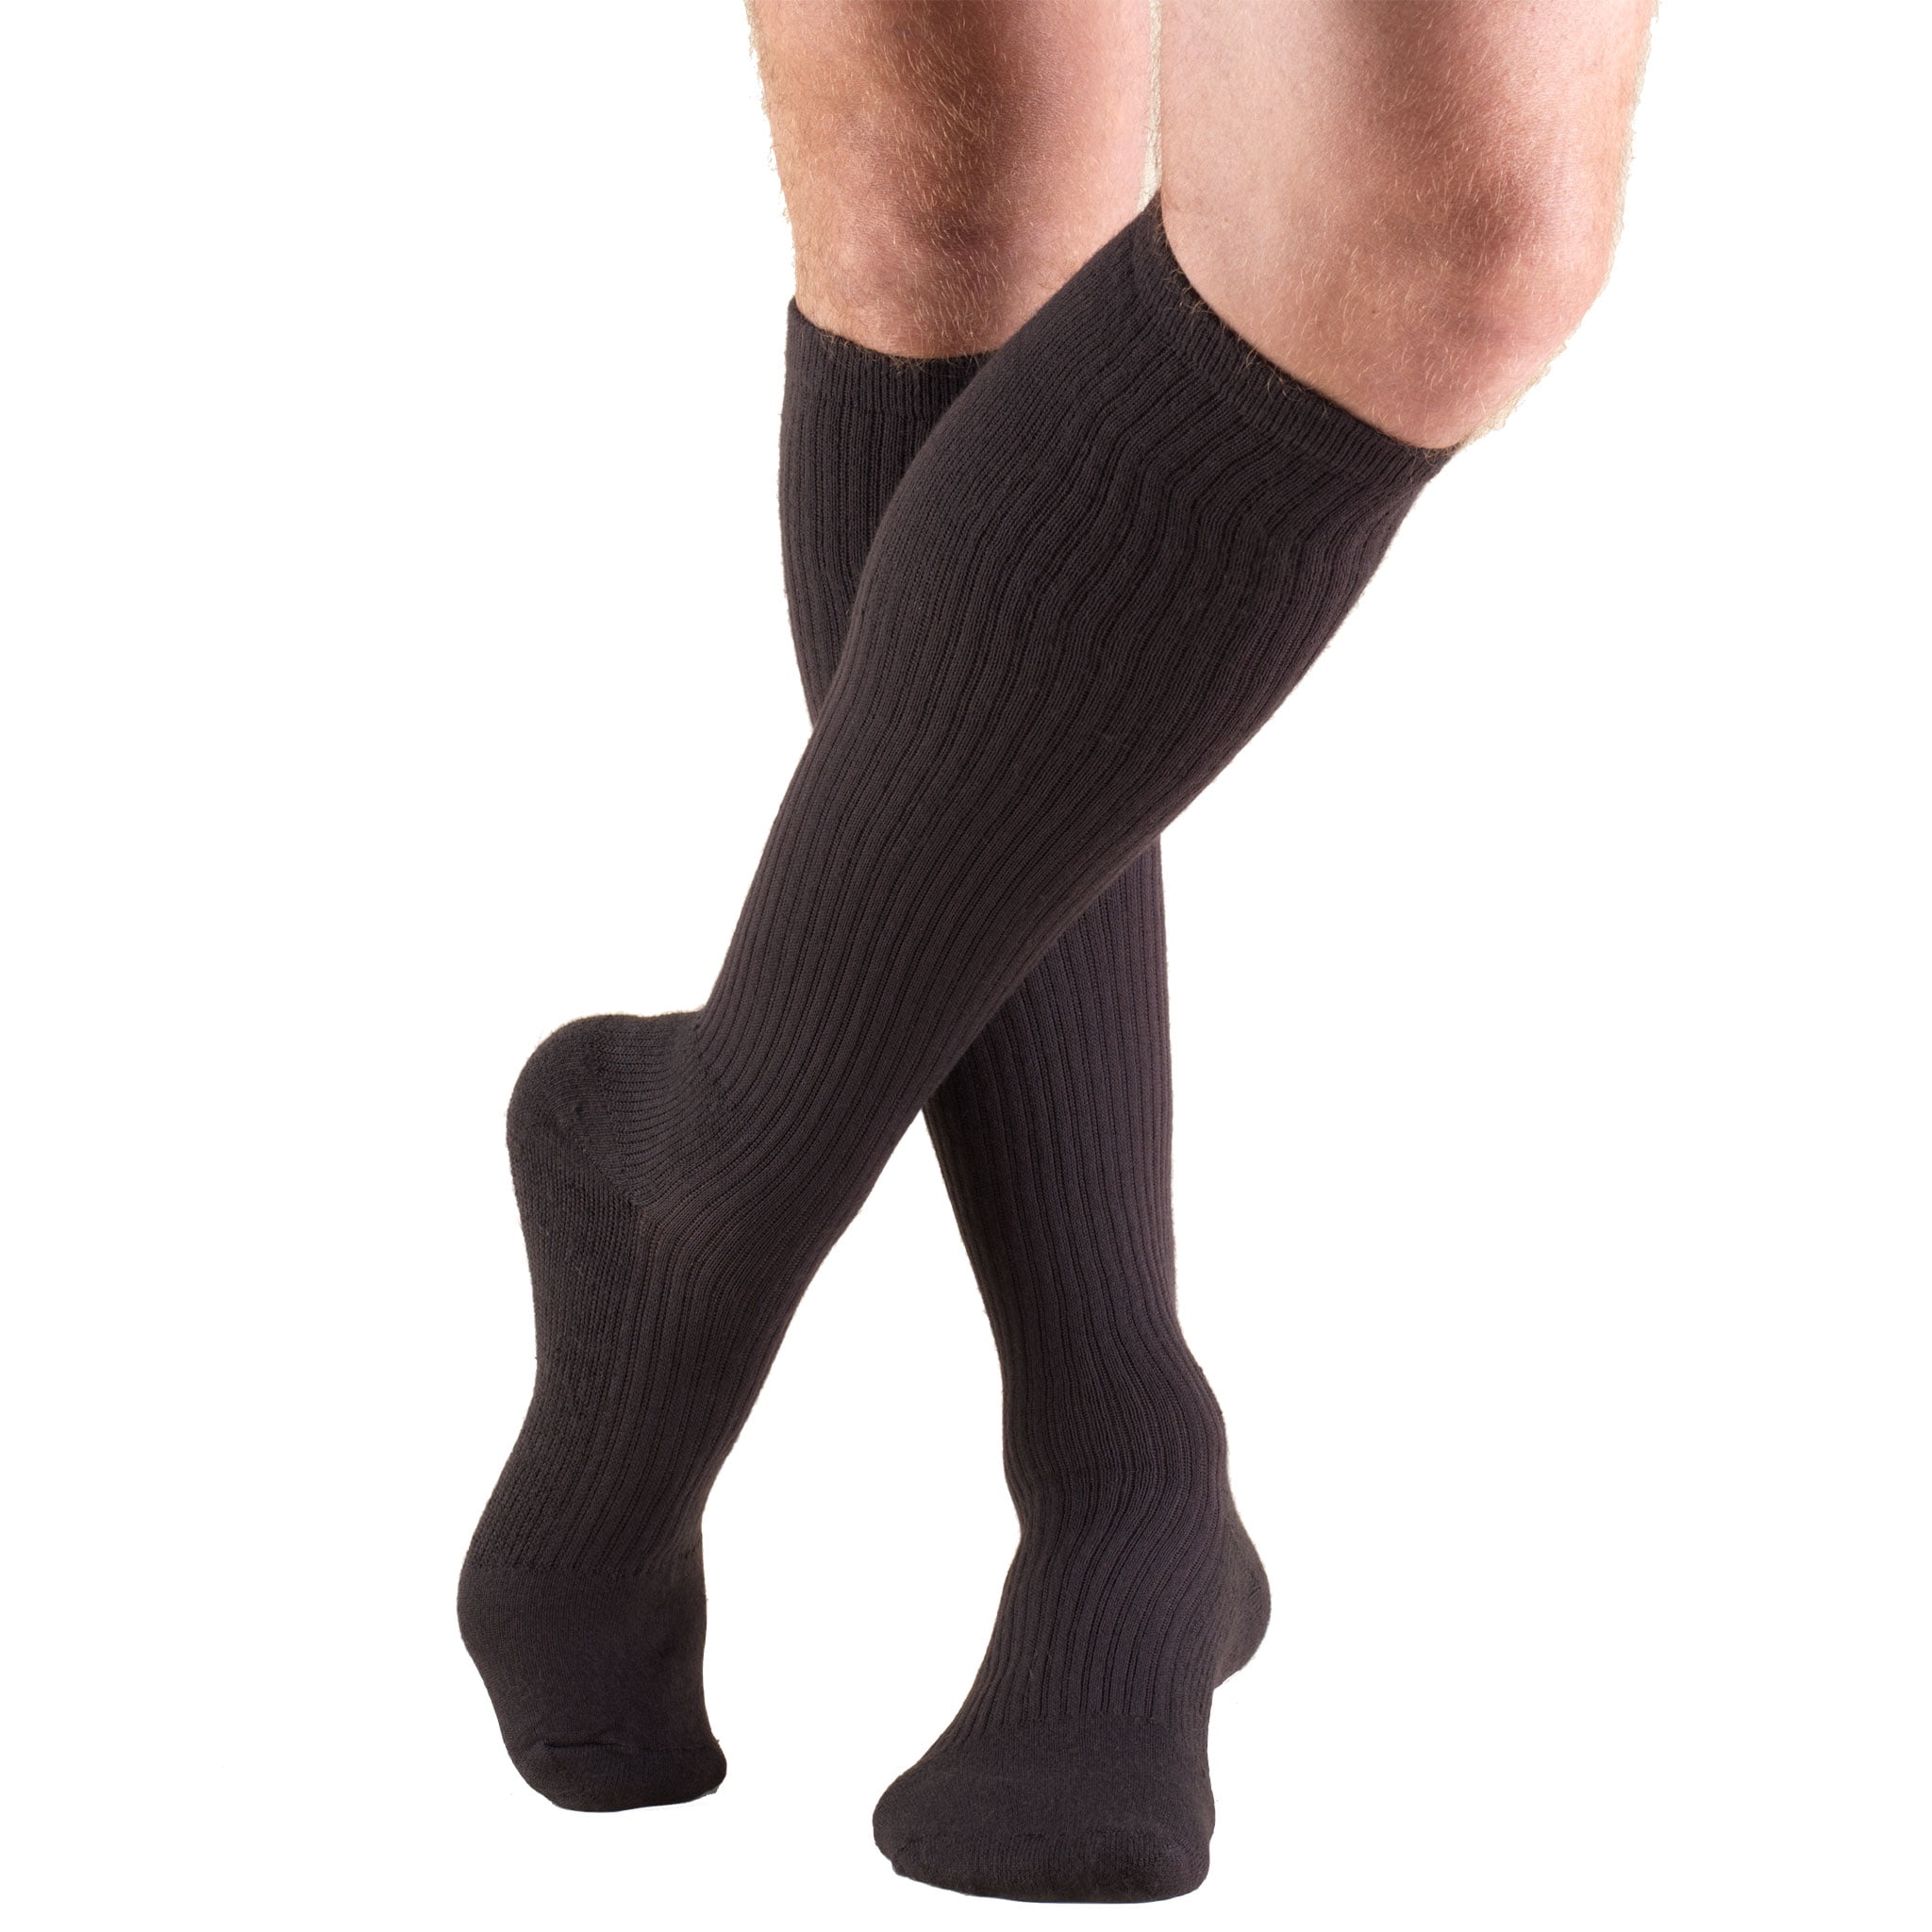 4 Pair of R Gear 12 to 18mmHG Compression Socks Large 